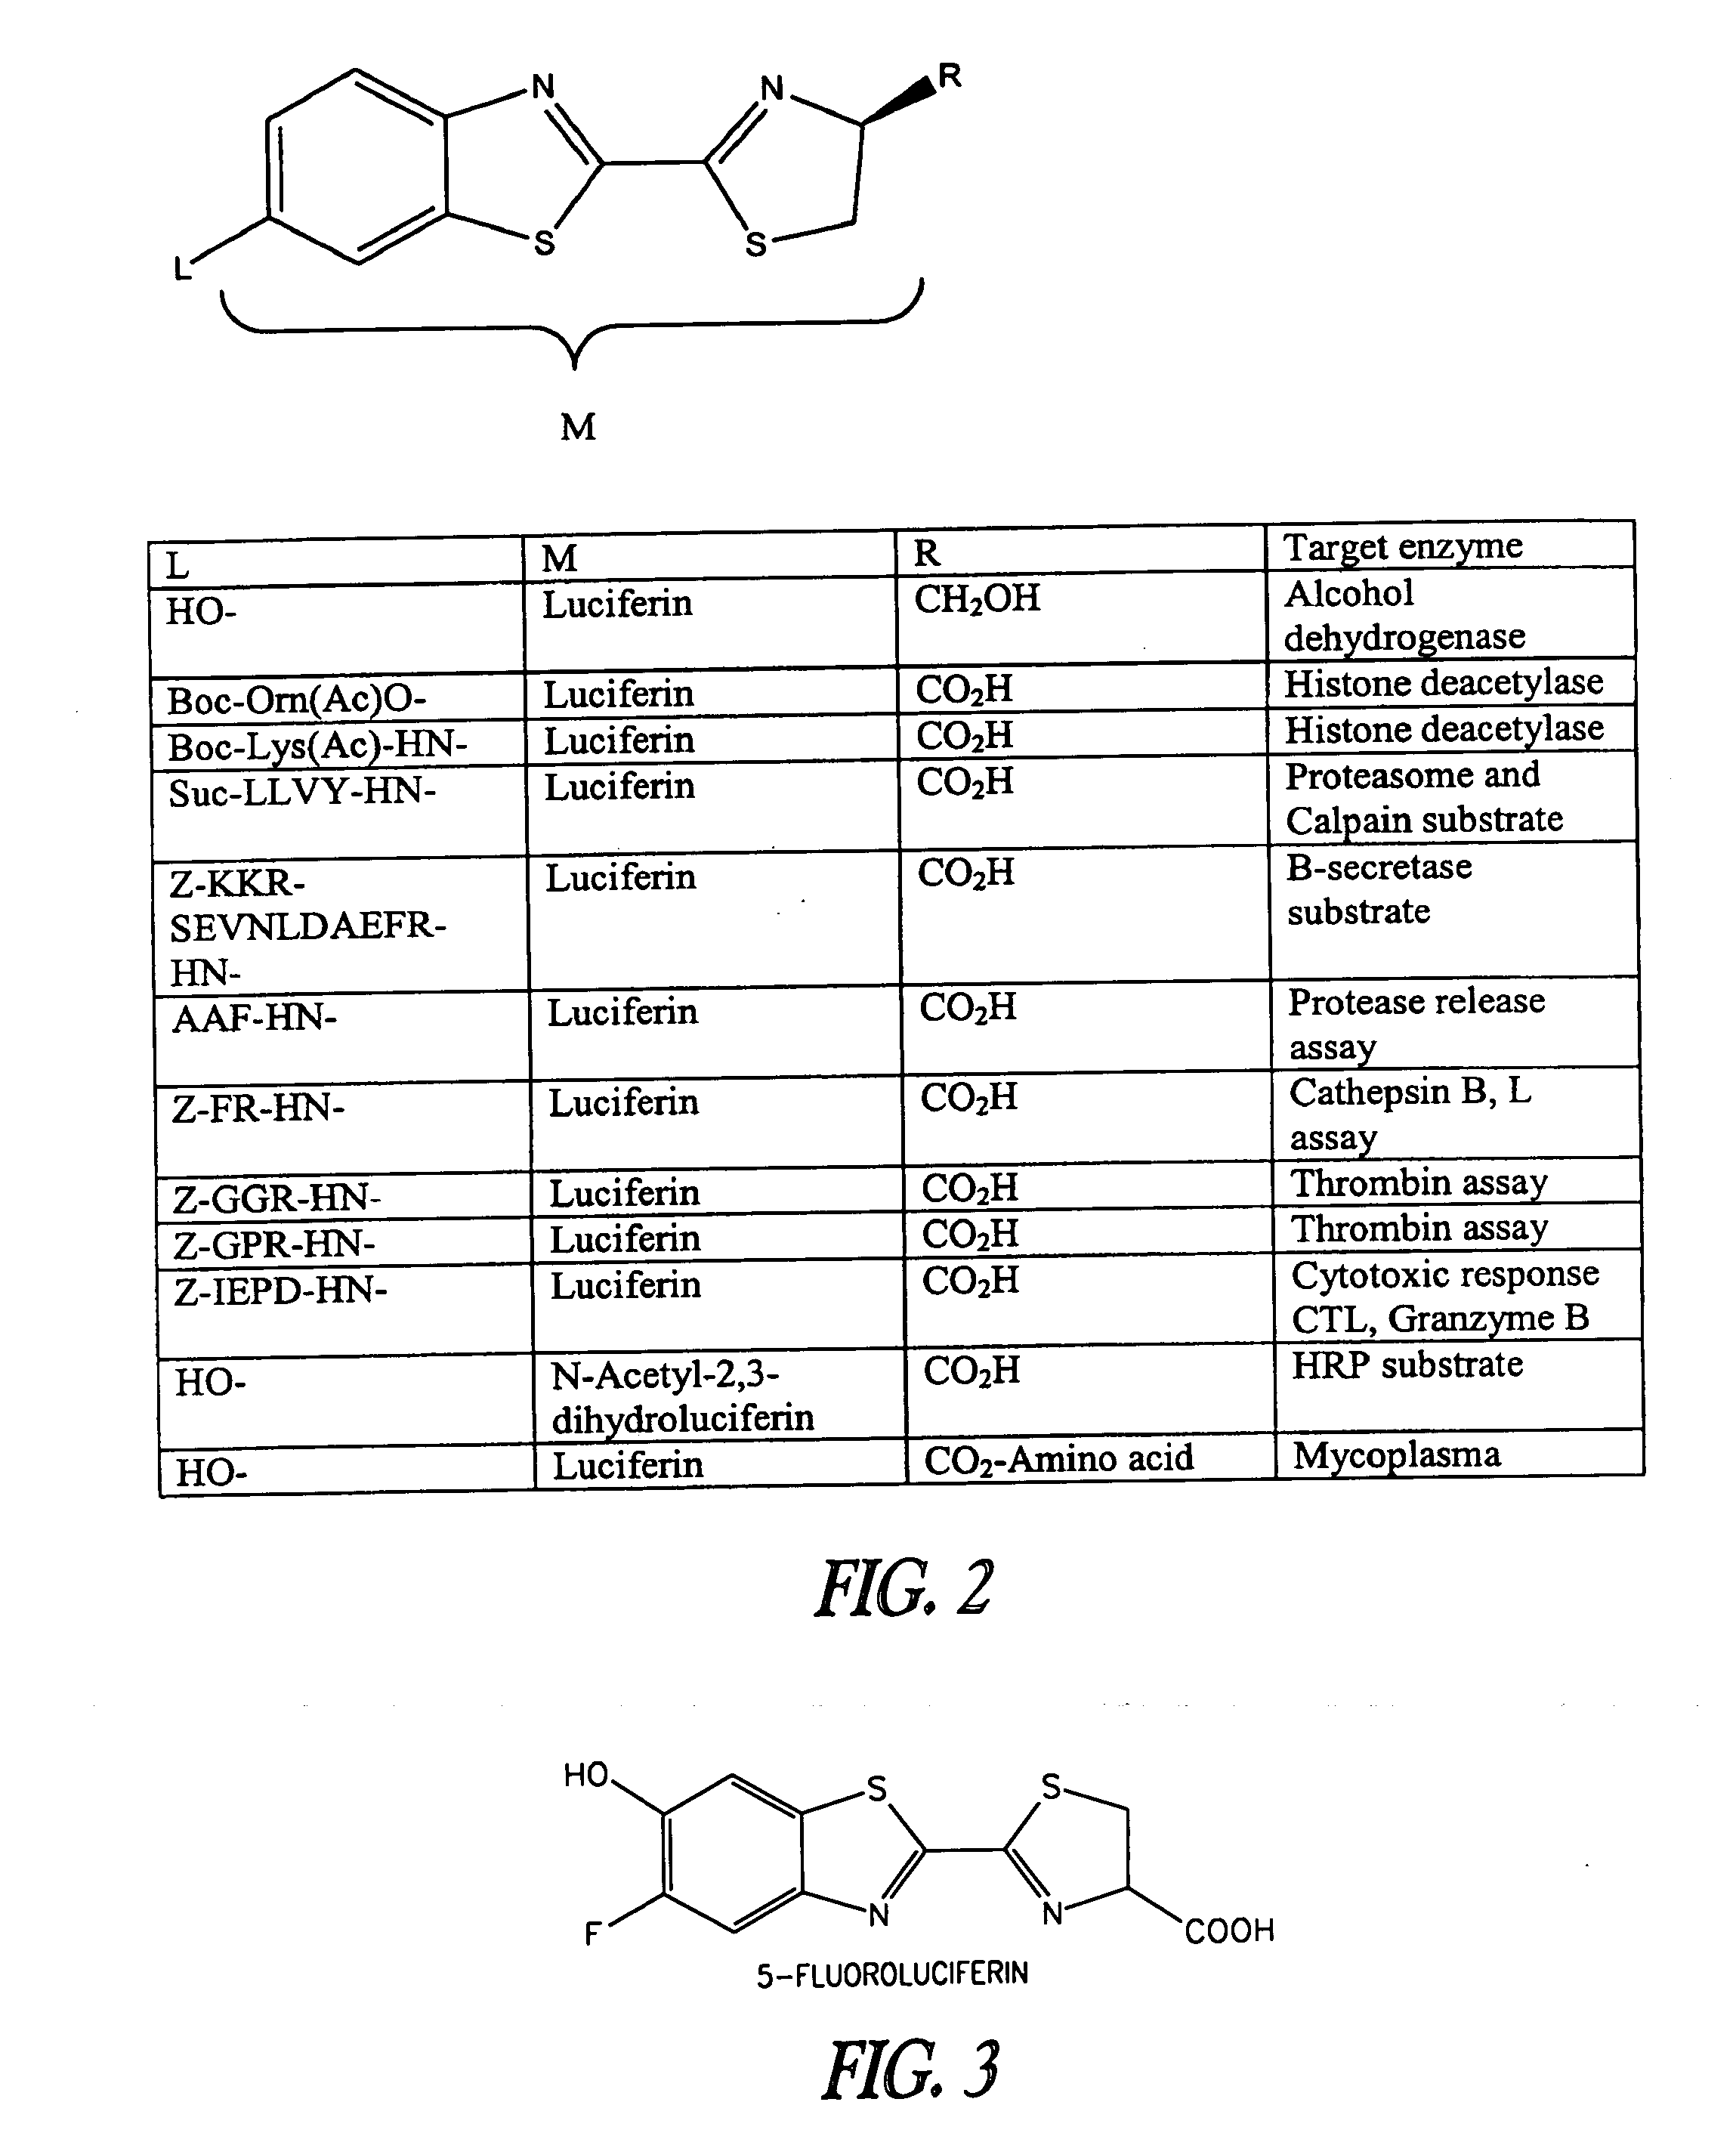 Luminogenic and fluorogenic compounds and methods to detect molecules or conditions